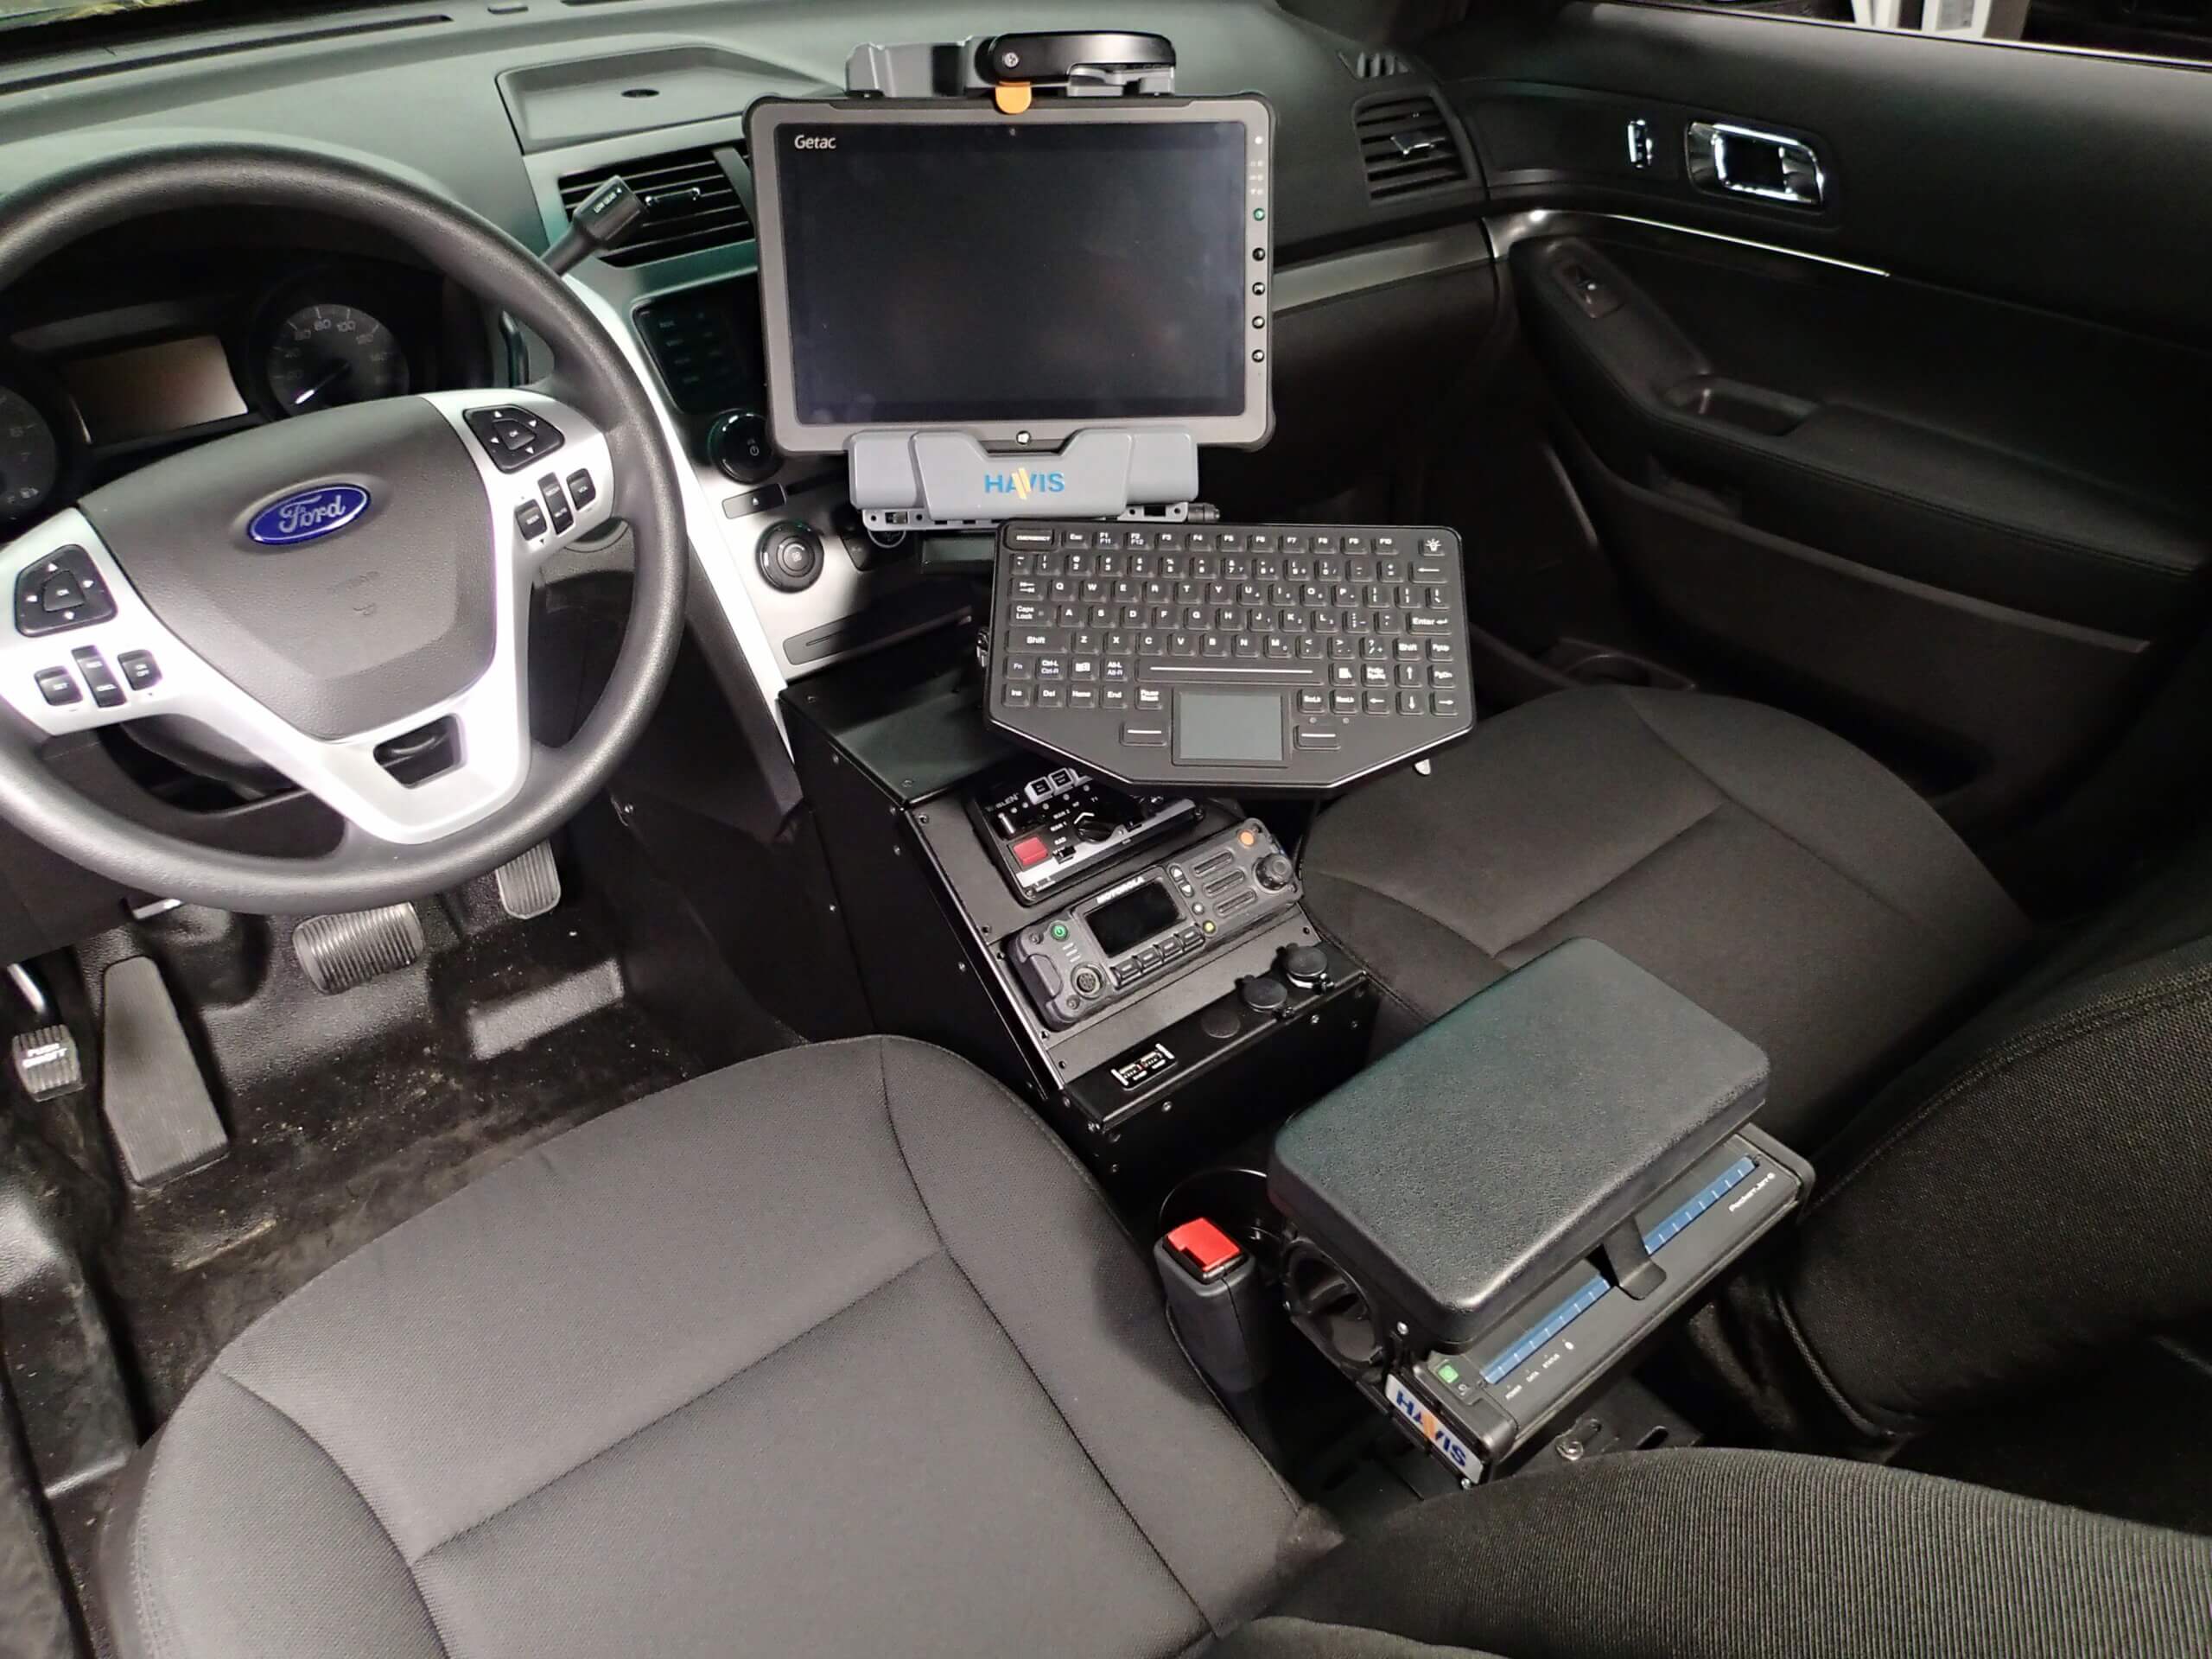 DISCONTINUED – 2013-2019 Ford Interceptor Utility Vehicle-Specific 8″ Console